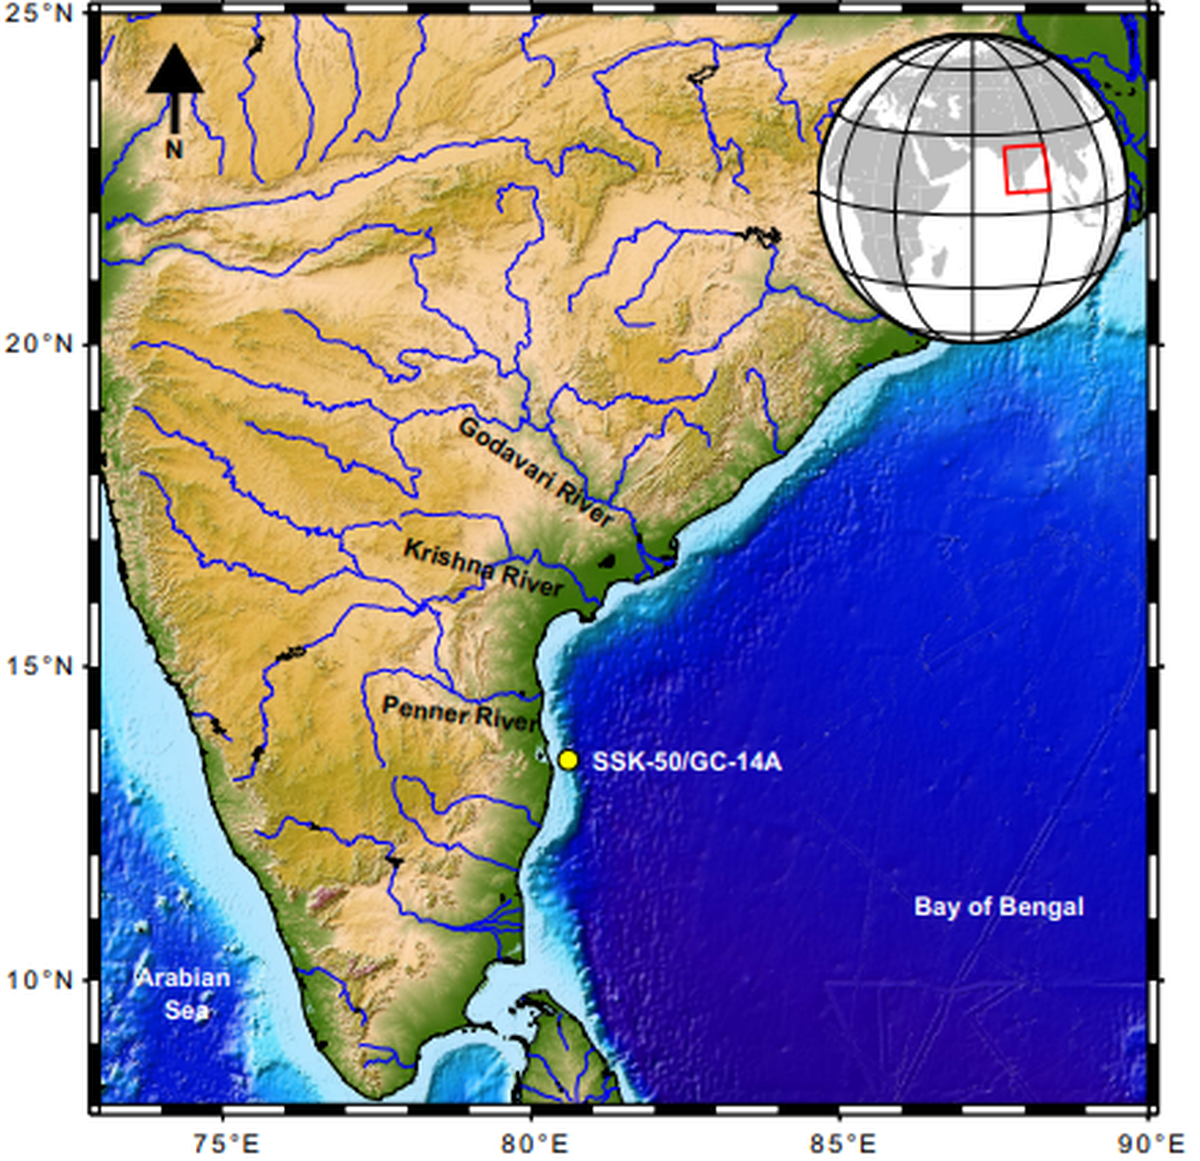 Sediments deposited at the core site originate predominantly from the Godavari, Krishna, and Penner Rivers, highlighted on the map.